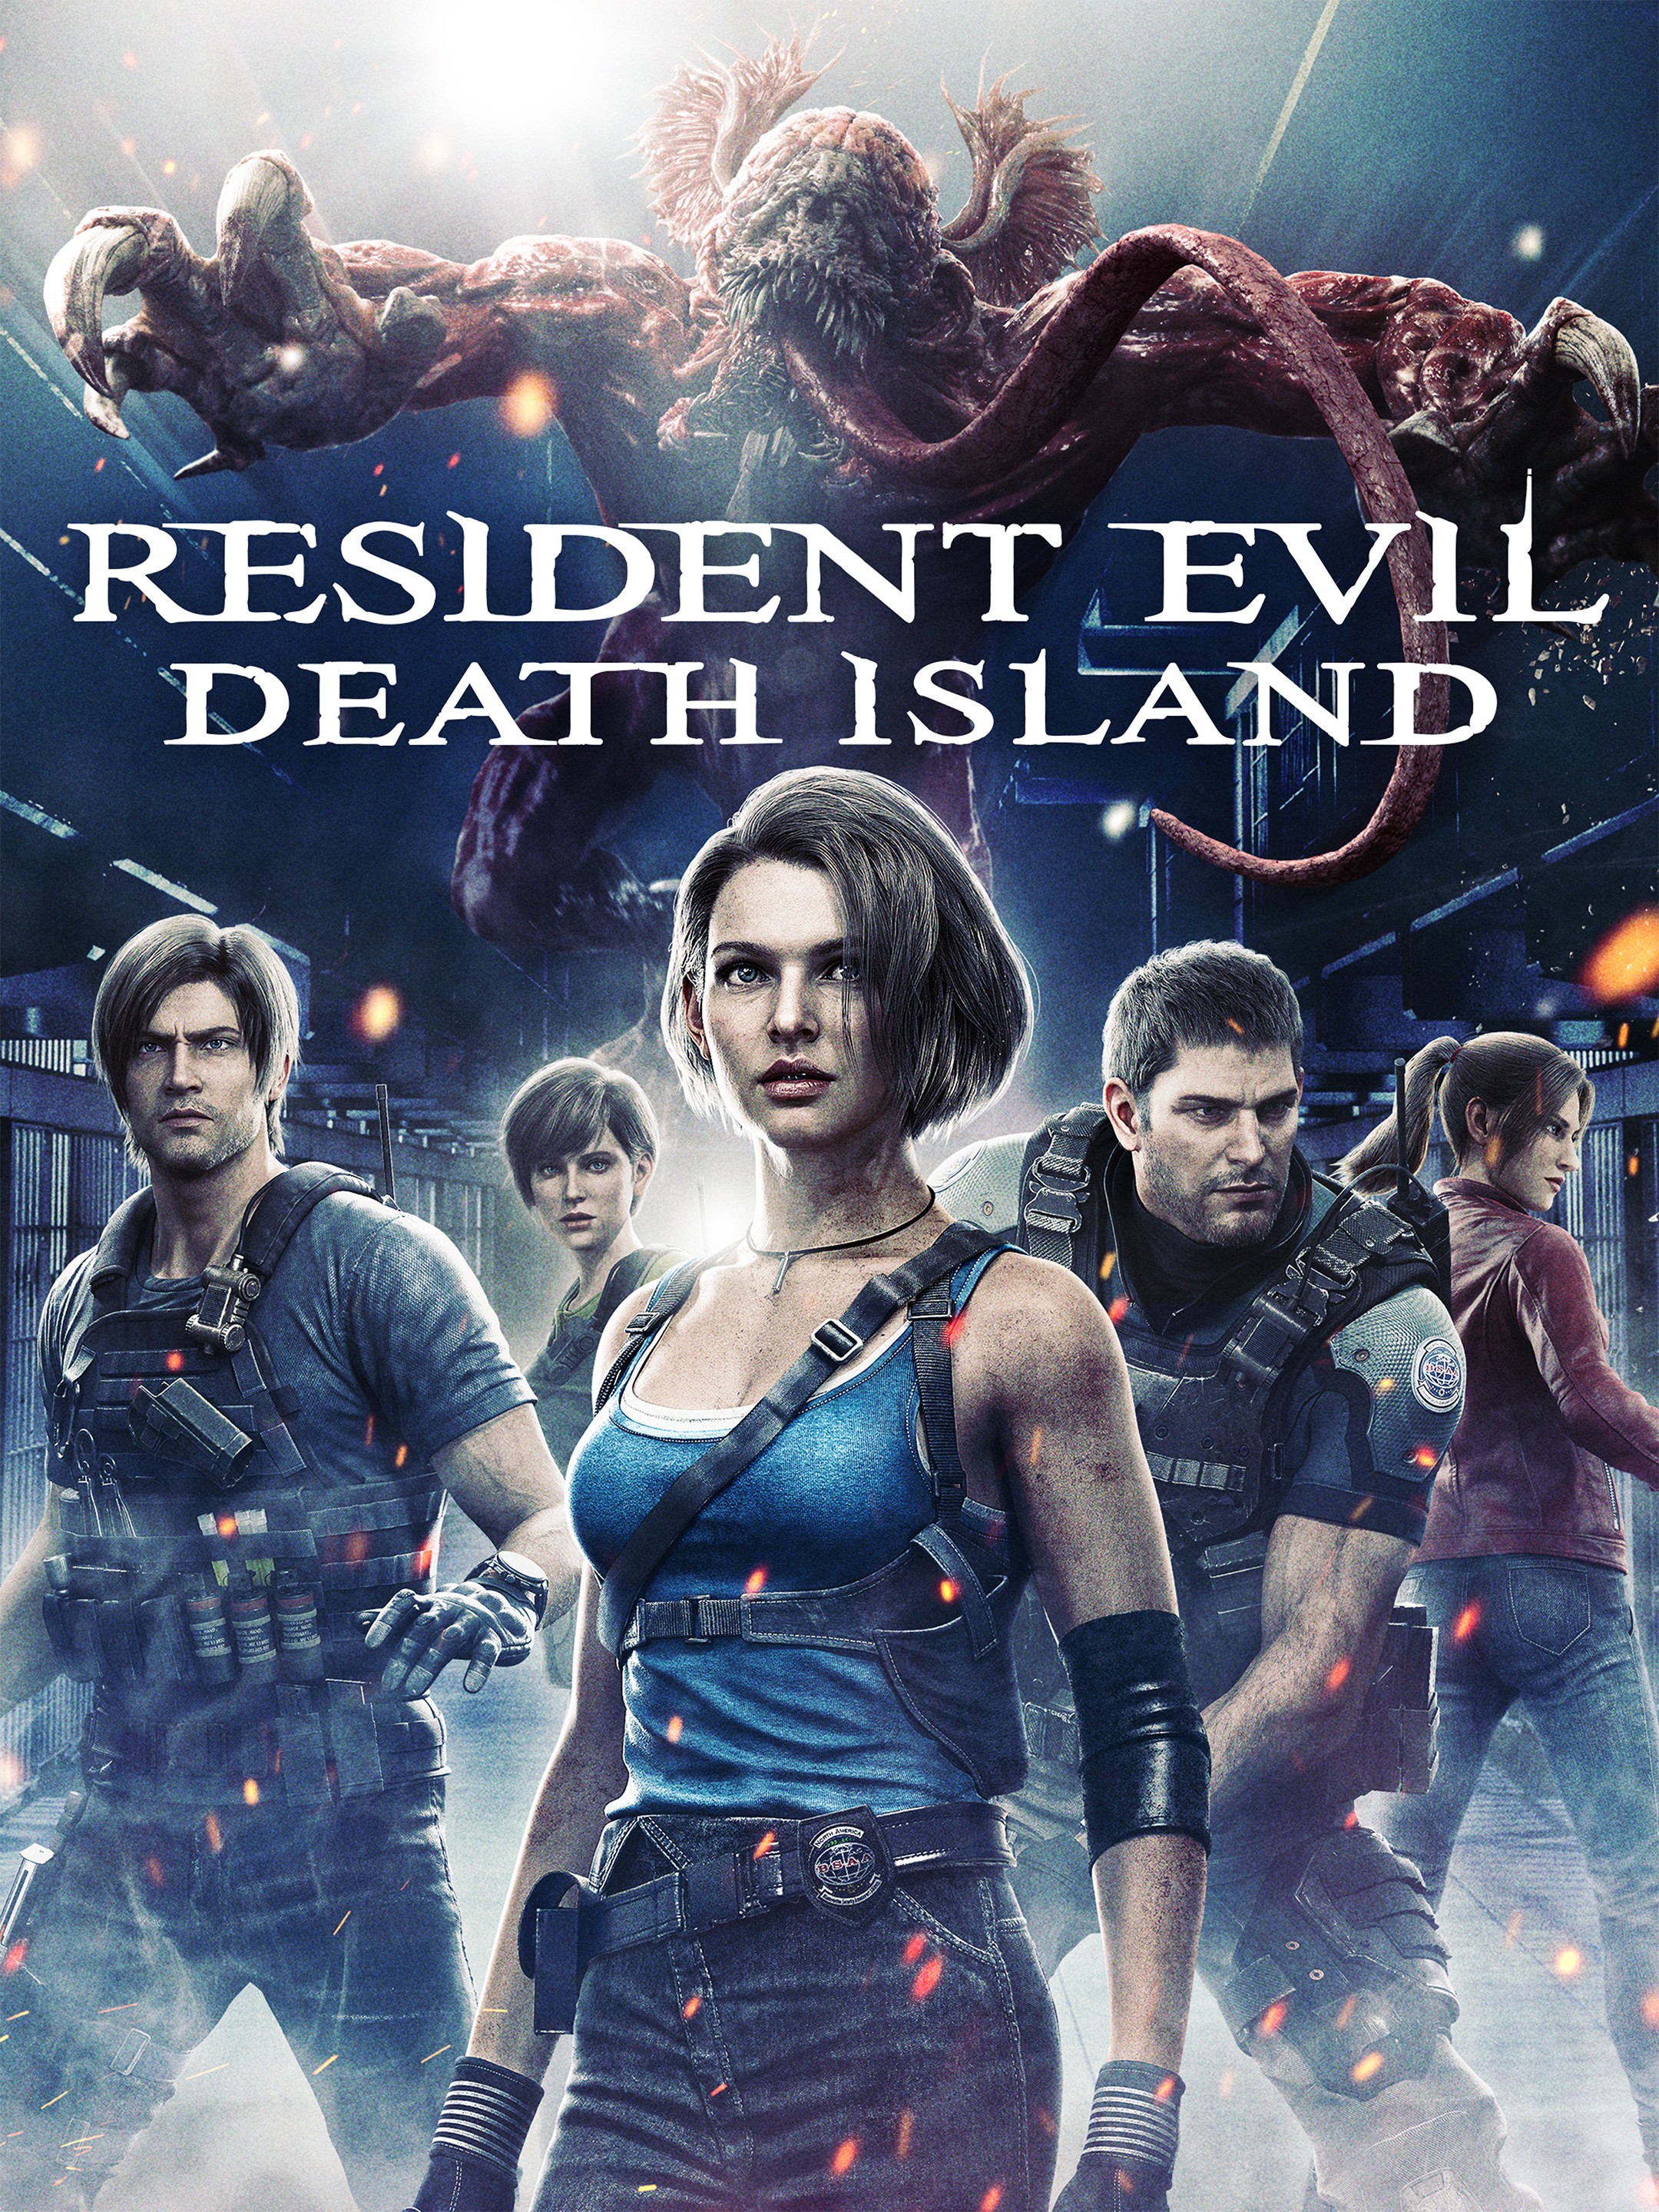 NEWS WATCH: RESIDENT EVIL Series Coming to Netflix Streaming Service -  Comic Watch